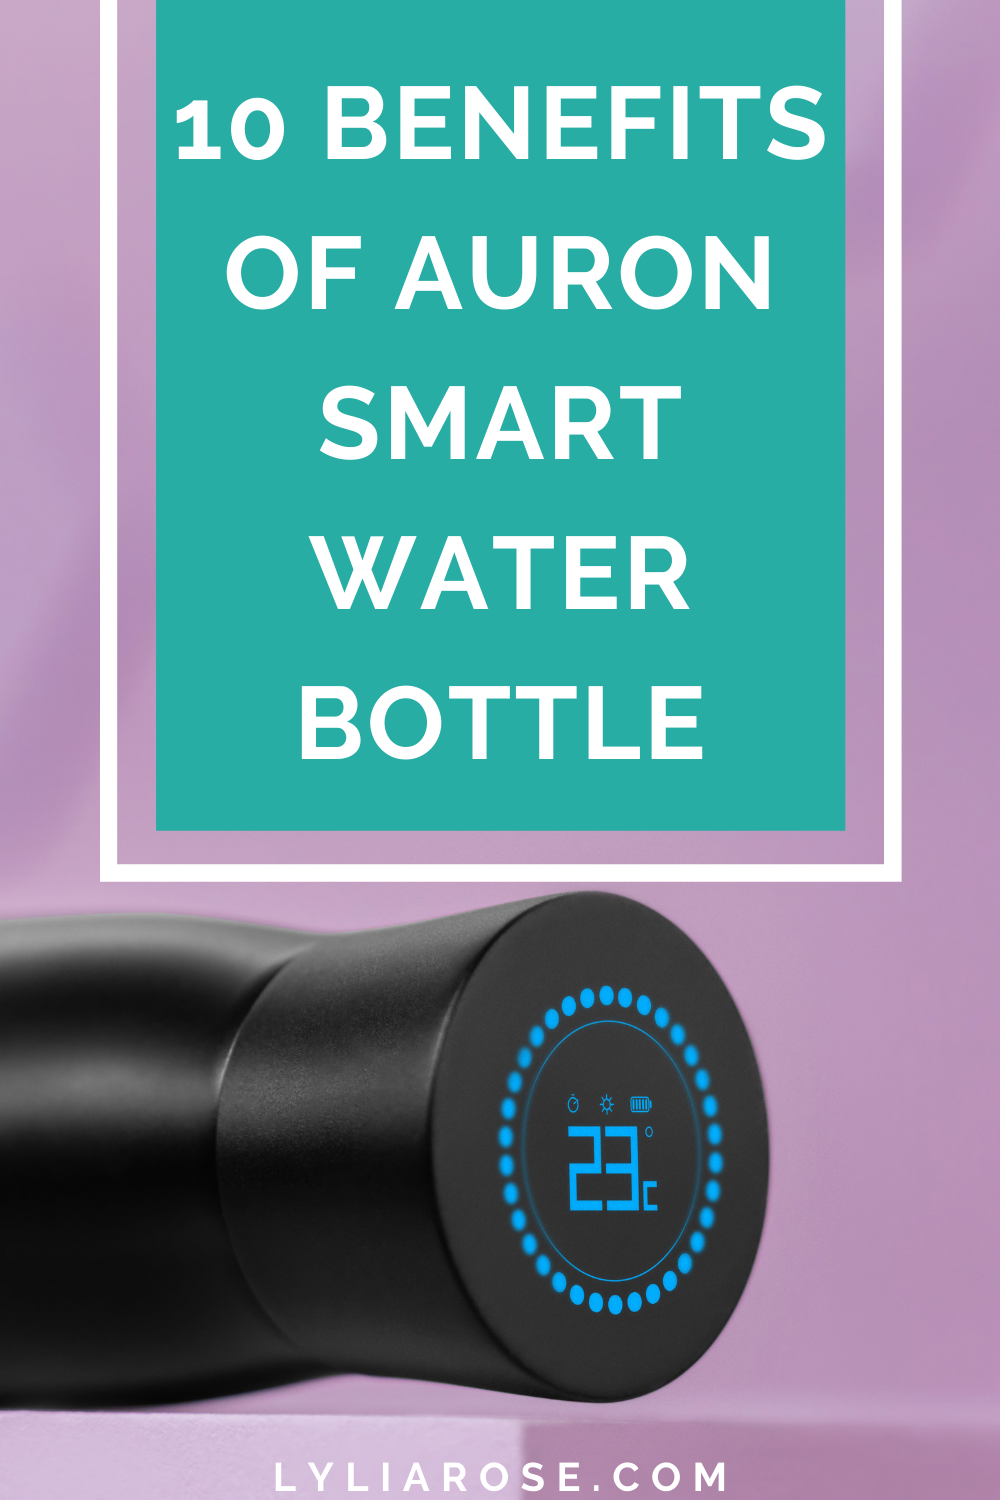 Auron self cleaning water bottle review